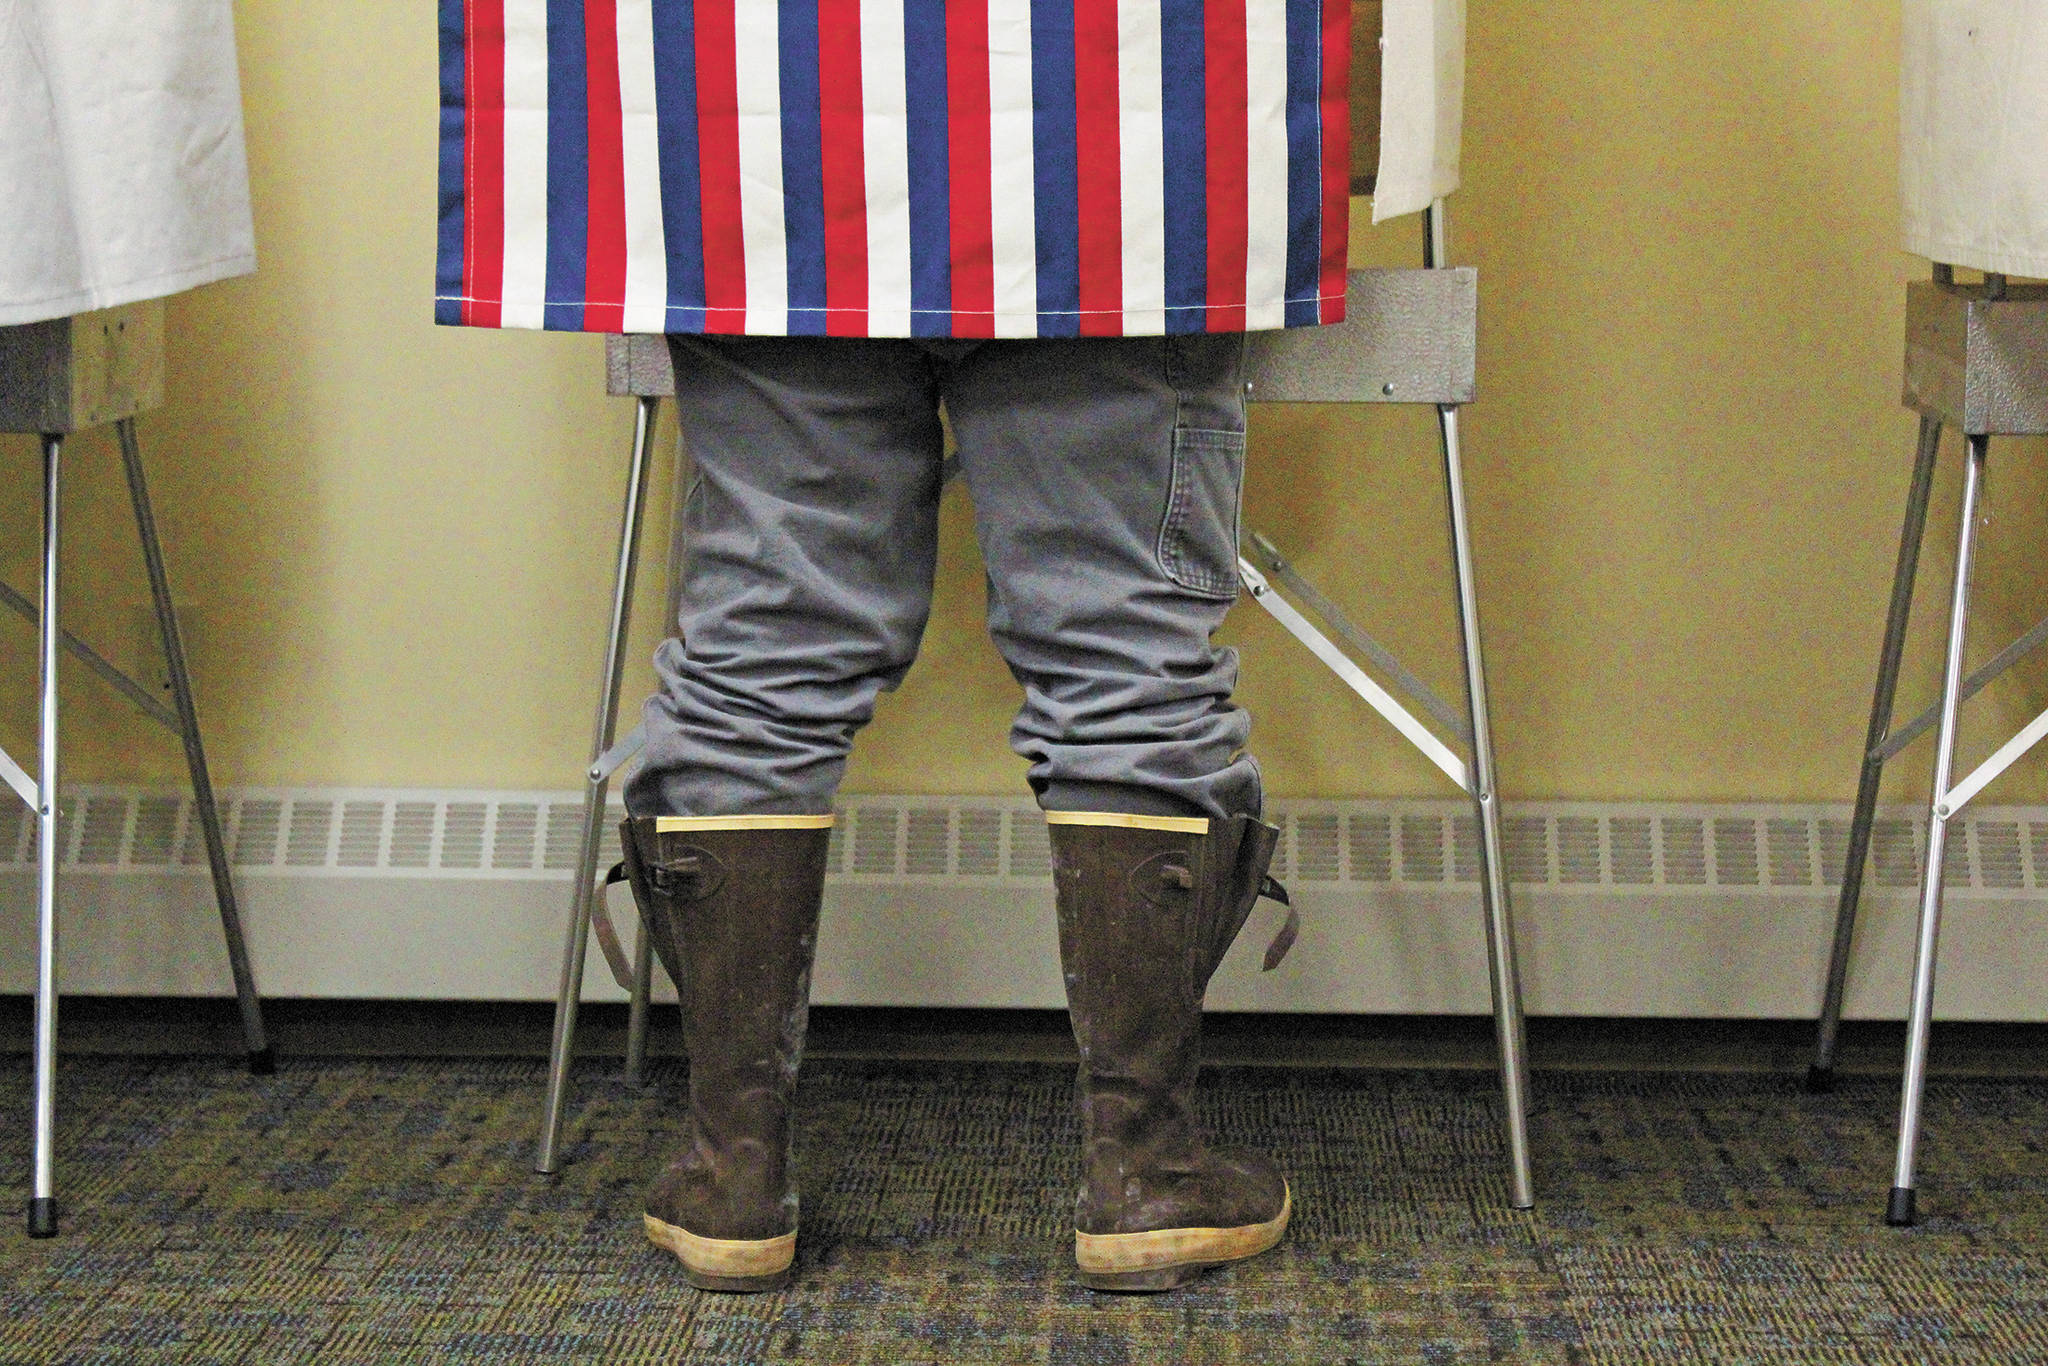 A Homer resident casts their vote during the Primary Election on Tuesday, Aug. 18 at Homer City Hall.(Photo by Megan Pacer/Homer News)